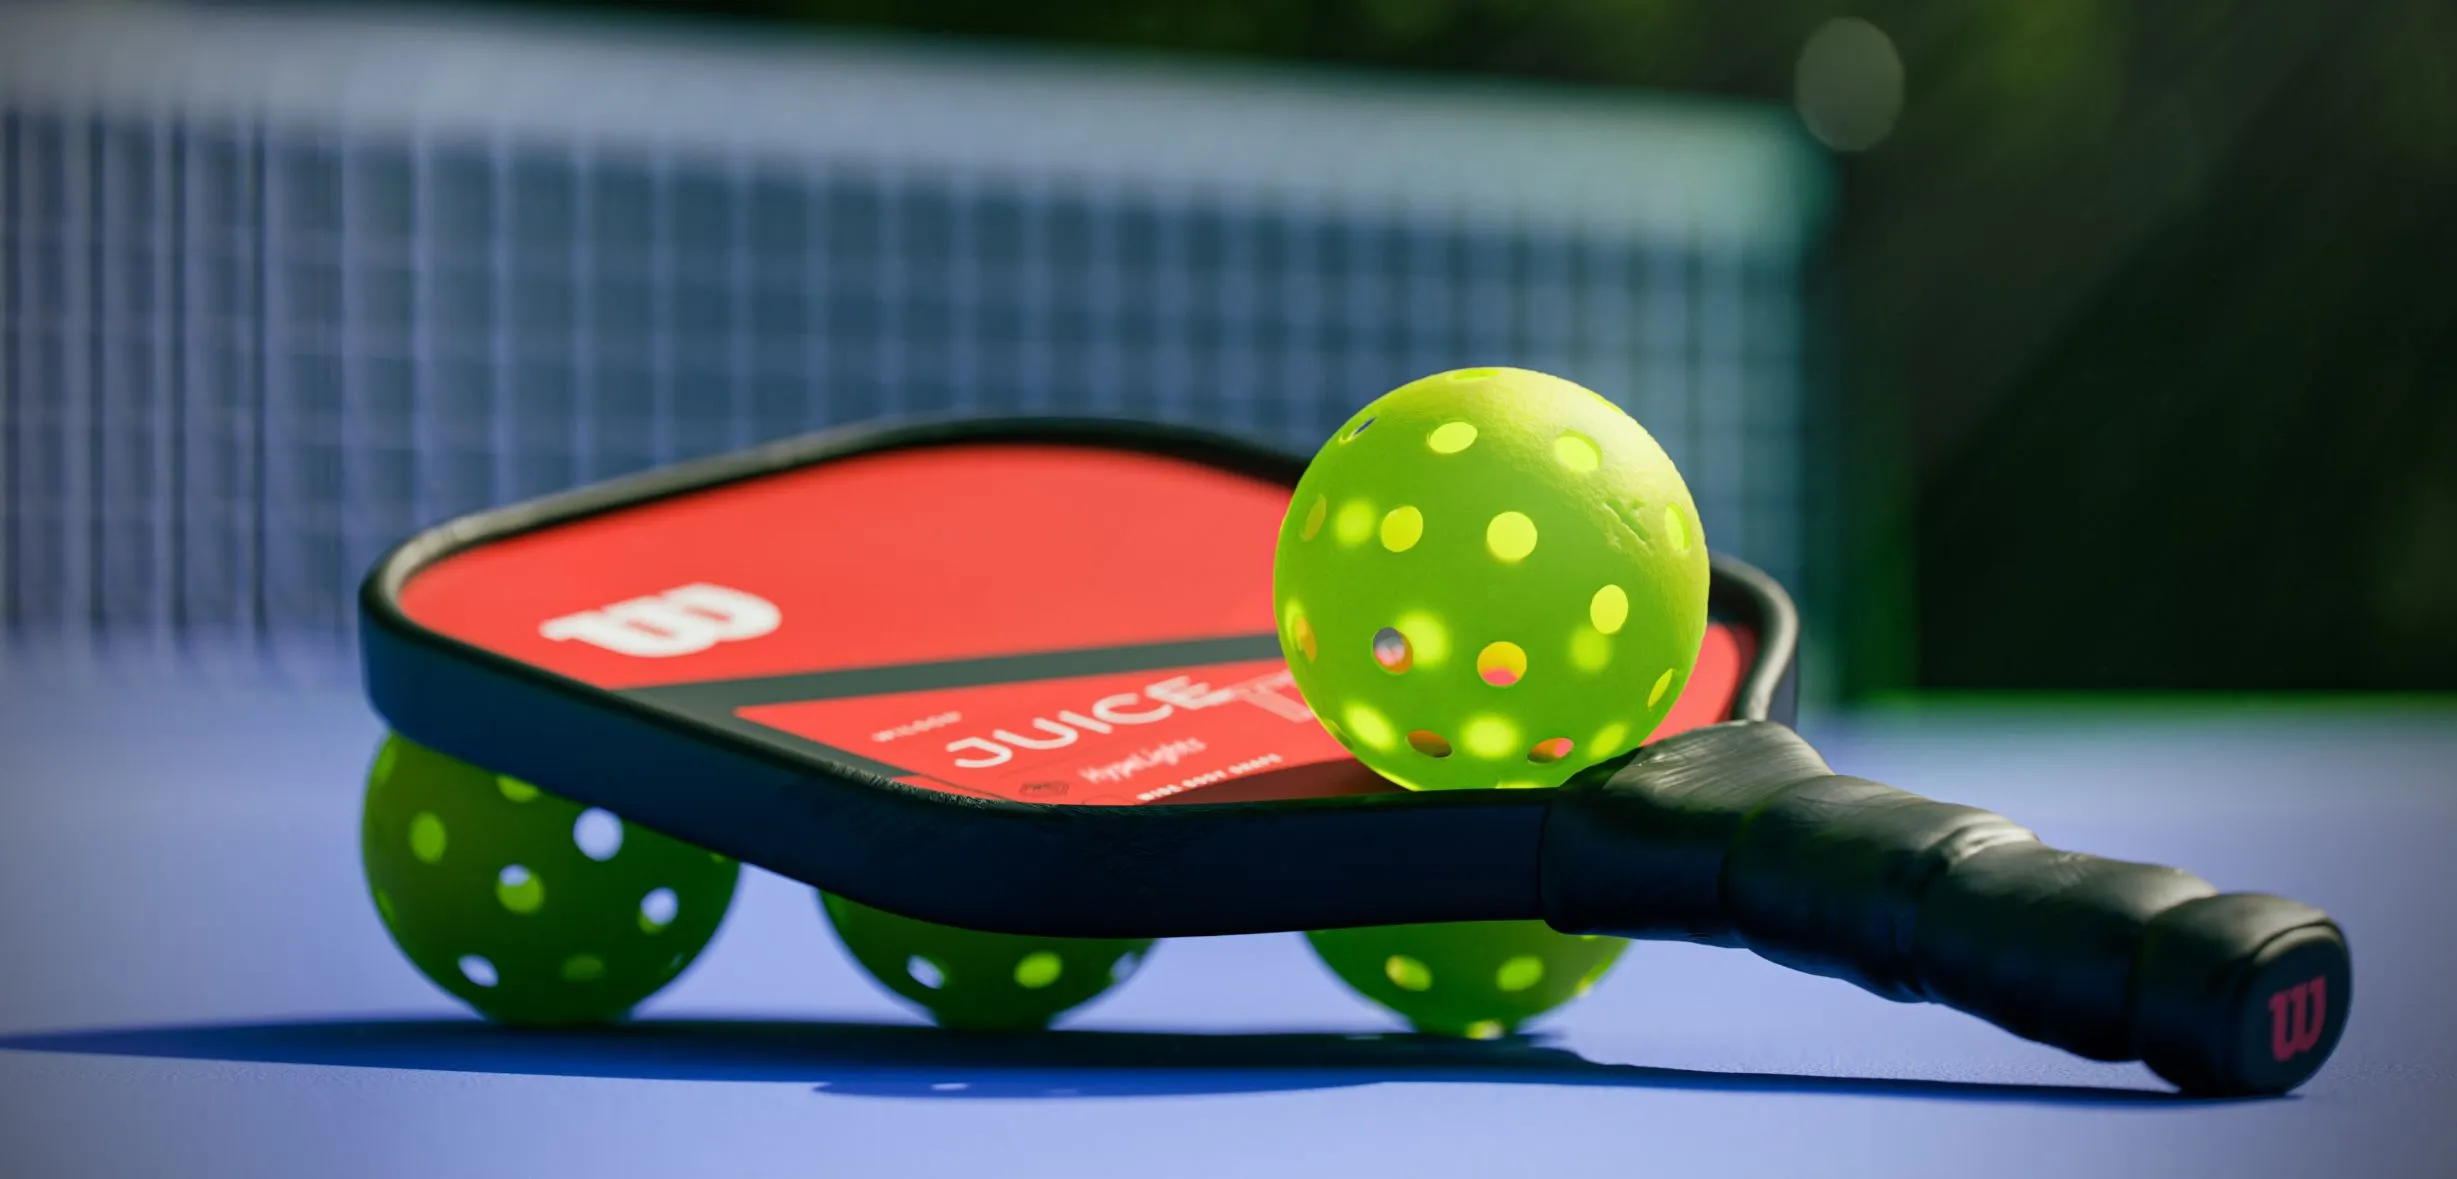 345 Pickleball Team Names That Are Creative and Funny